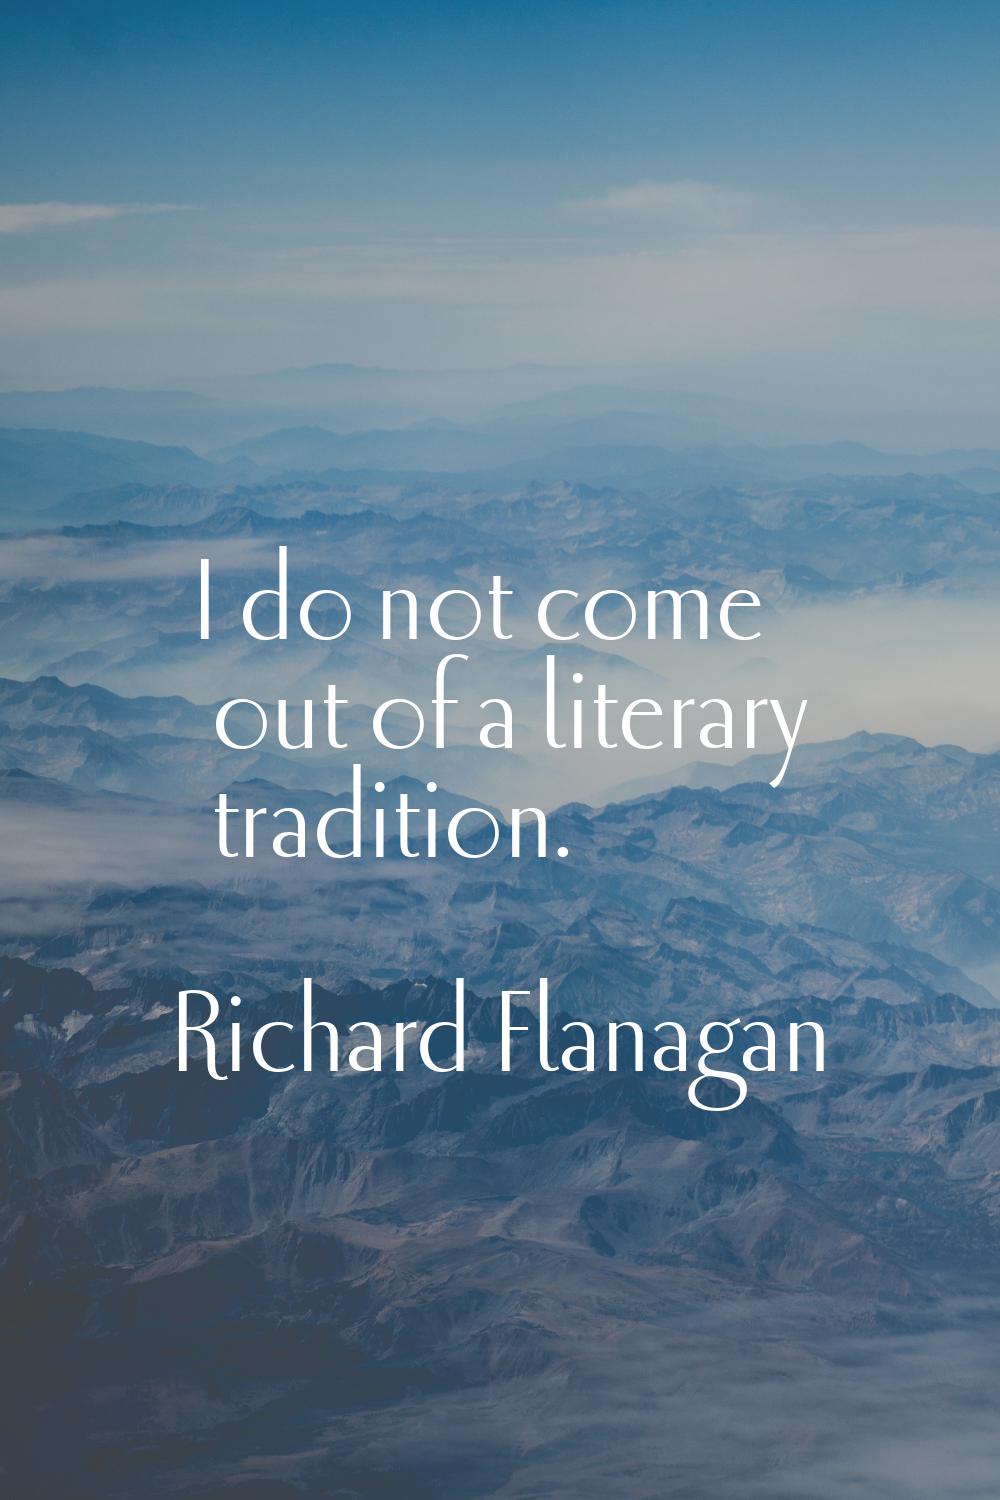 I do not come out of a literary tradition.